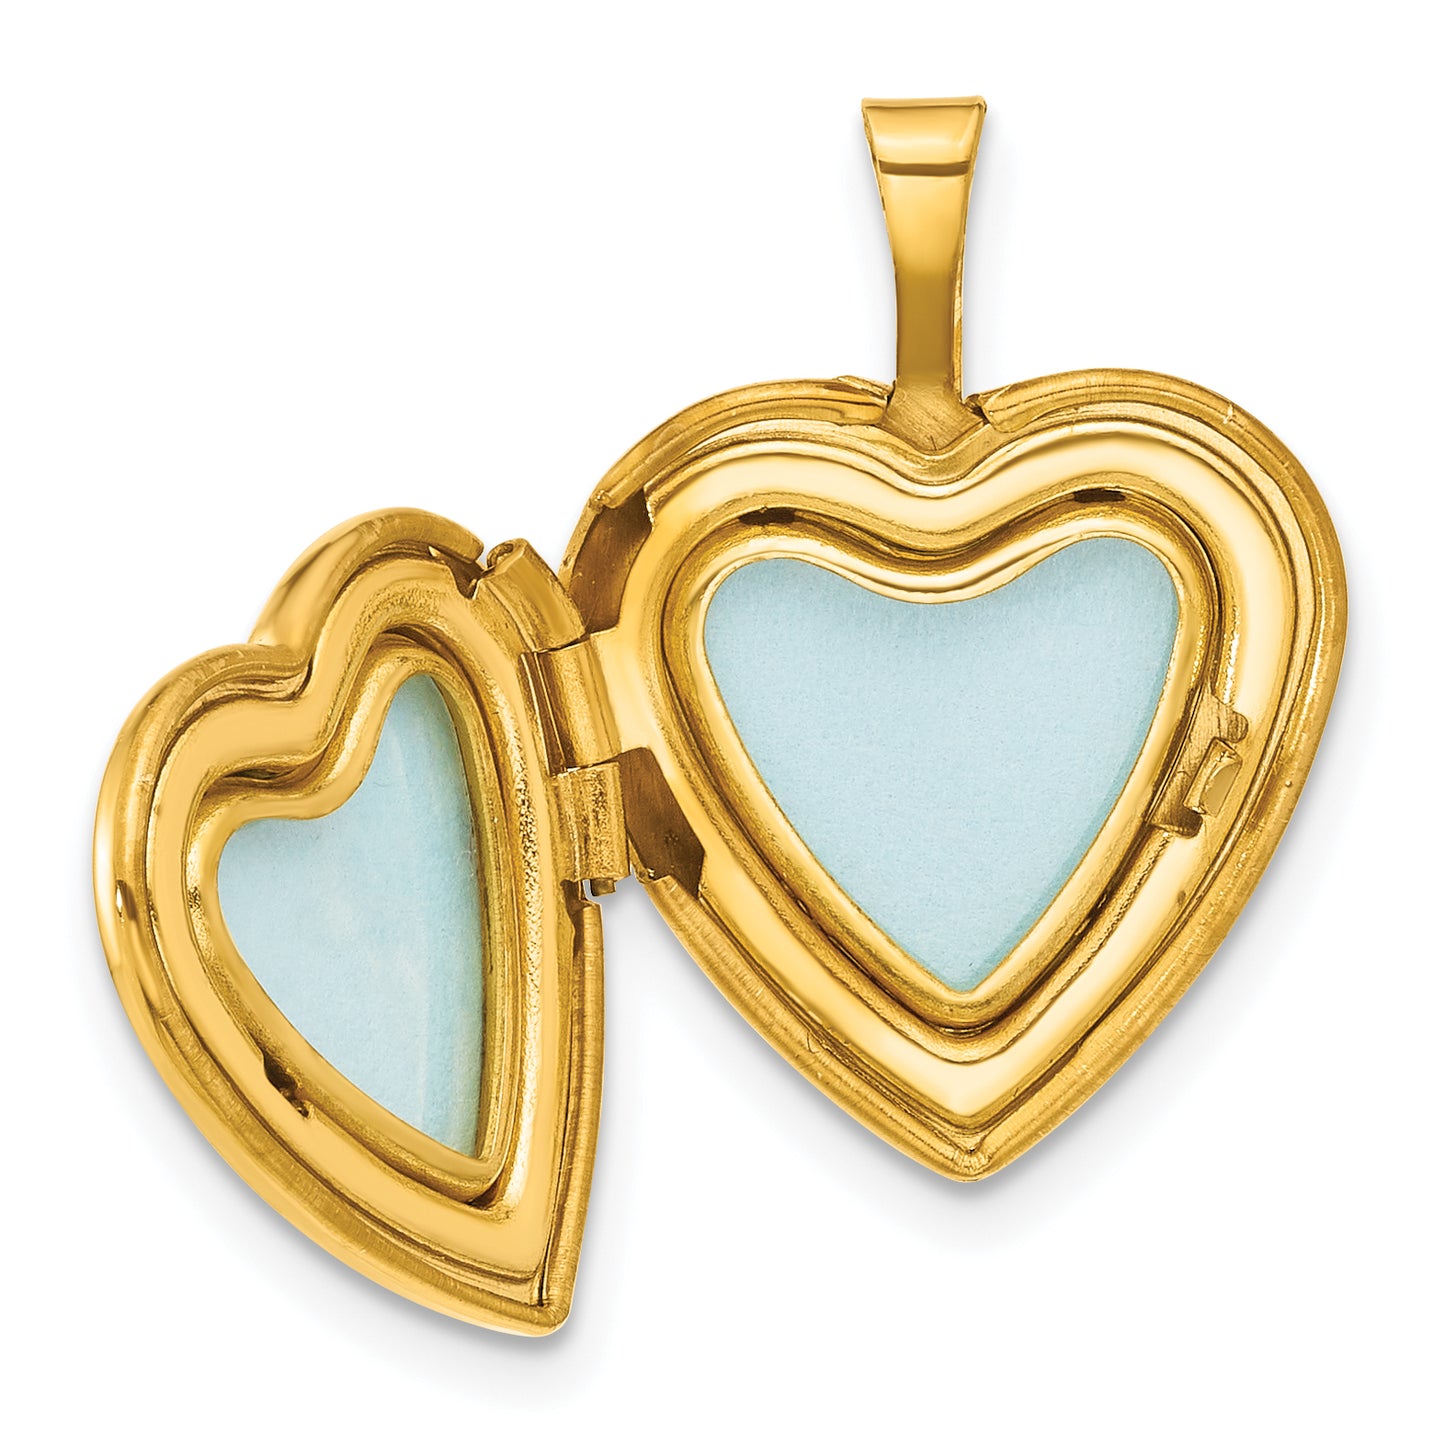 1/20 Gold Filled Polished and Textured Diamond 16mm Floral Heart Locket